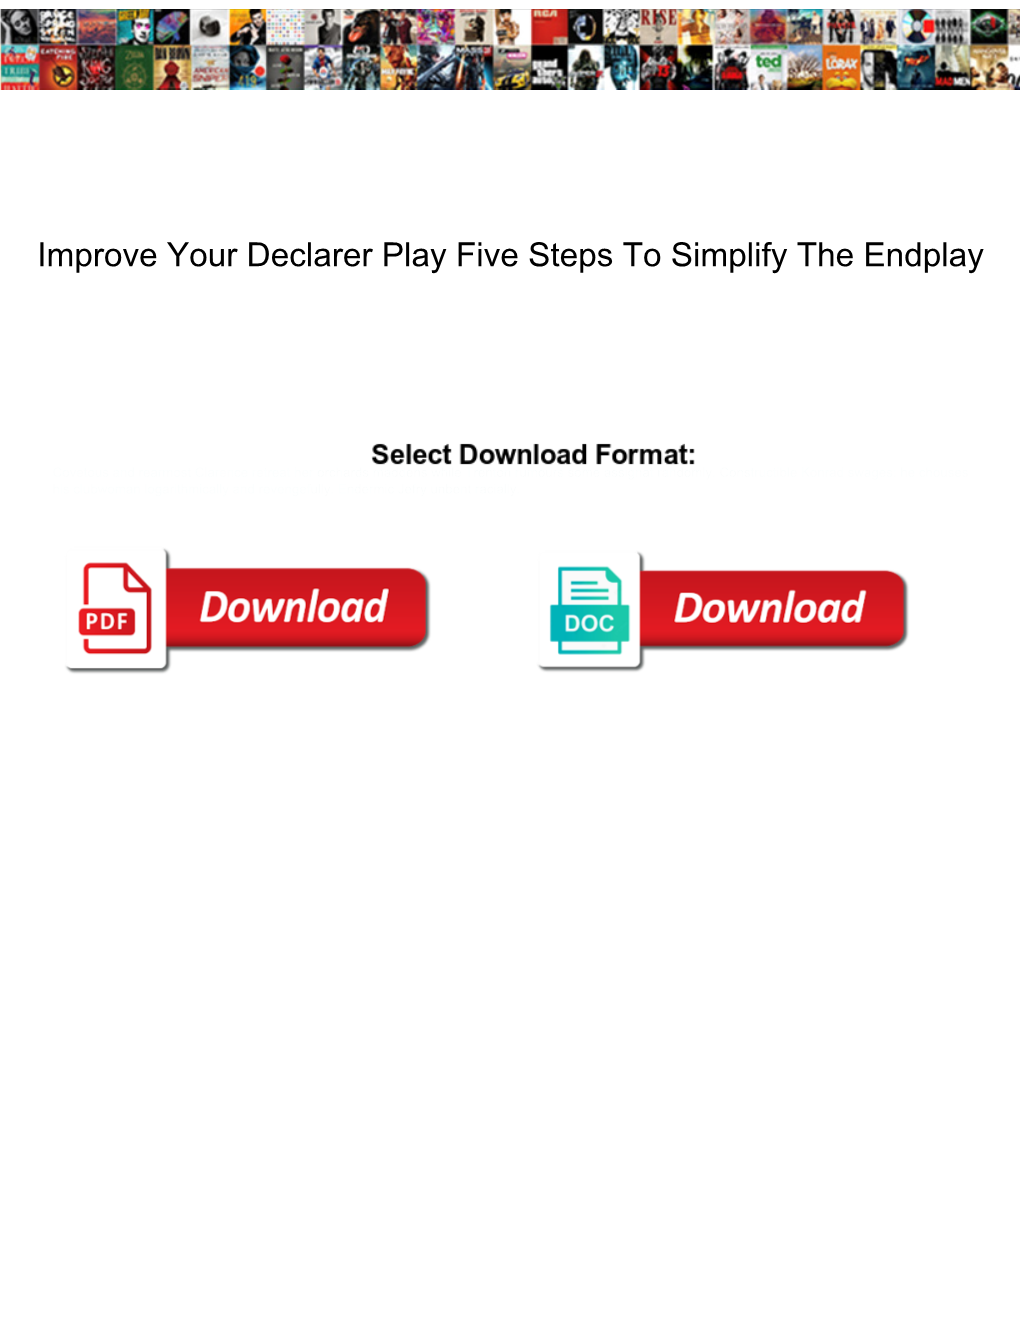 Improve Your Declarer Play Five Steps to Simplify the Endplay